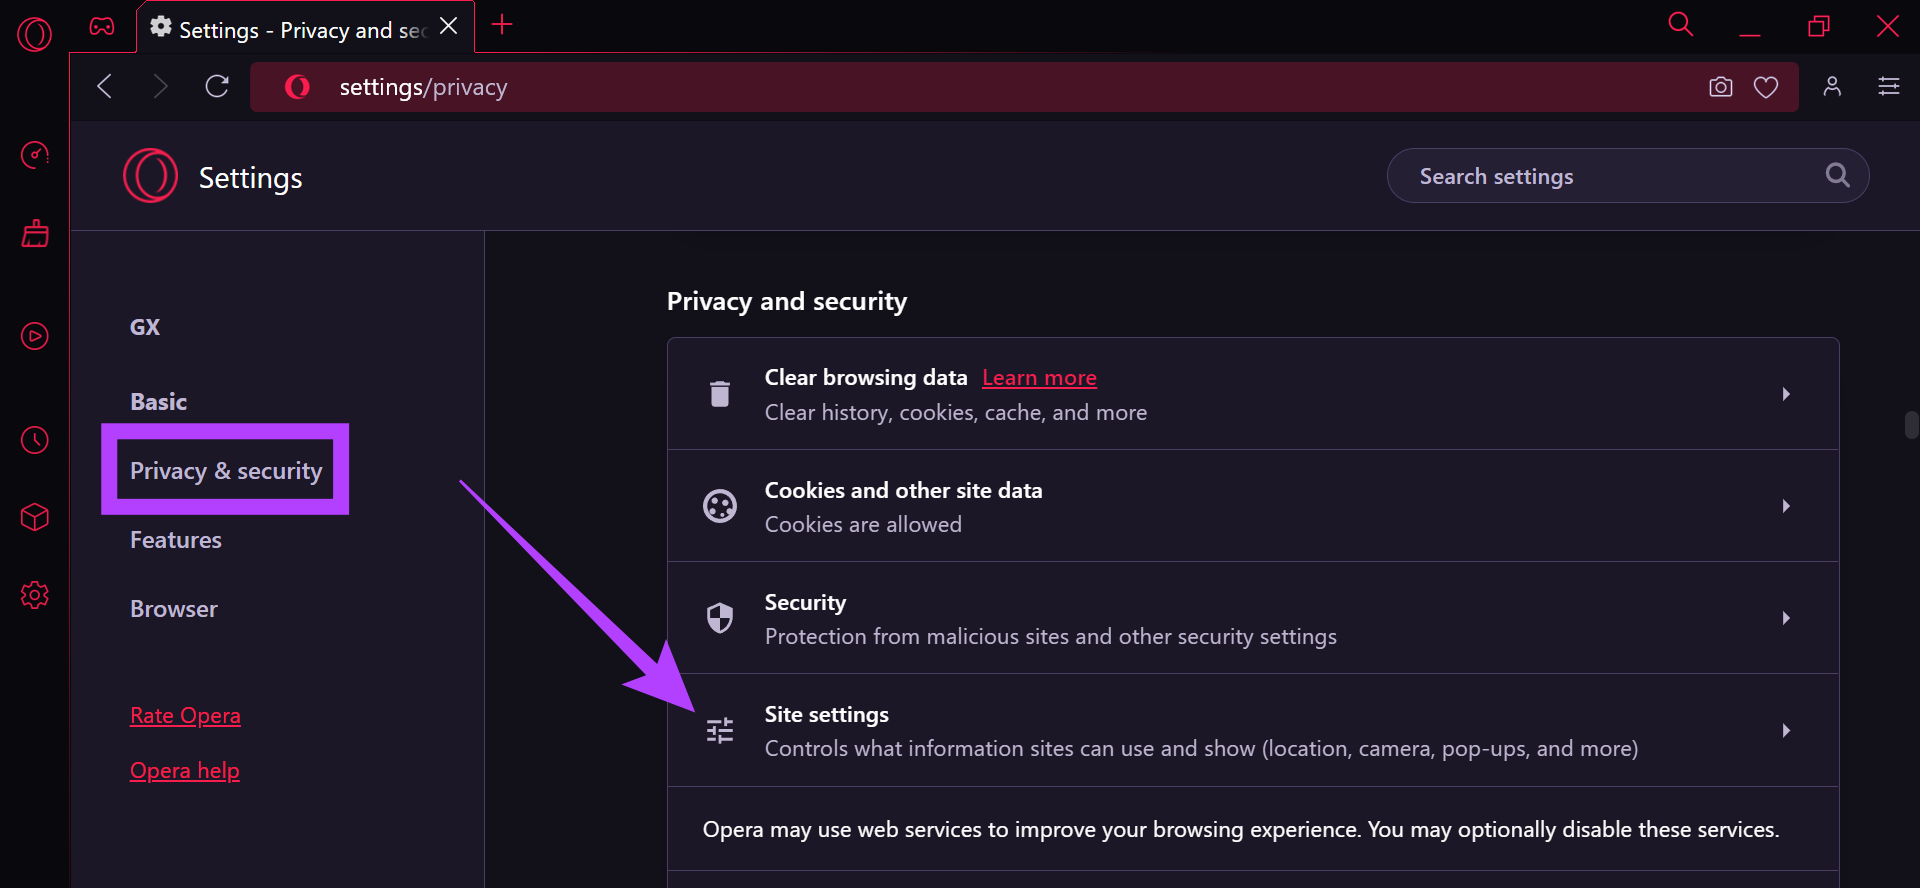 In Privacy and security, click on Site settings